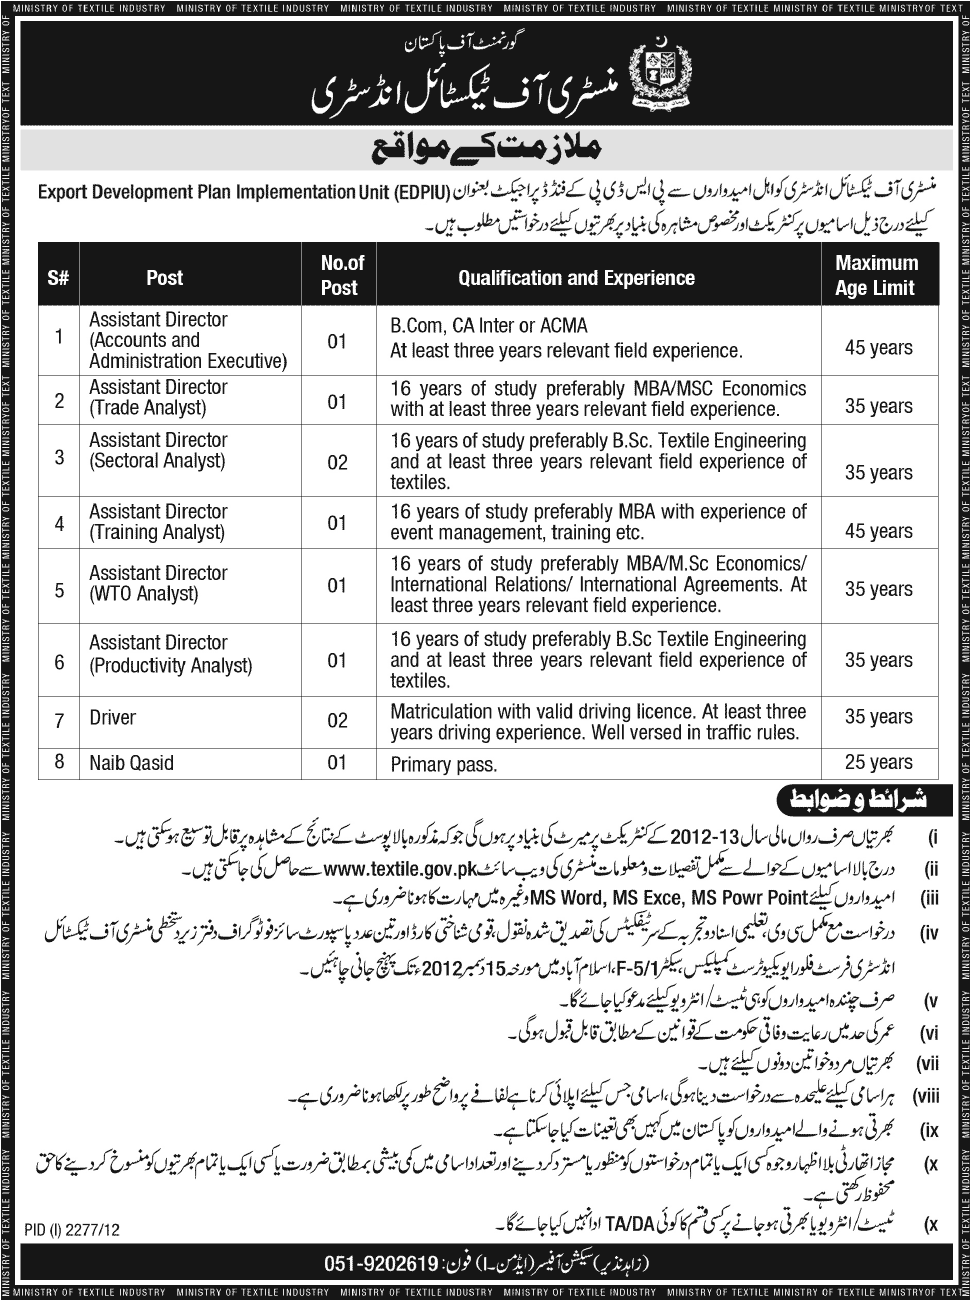 www.textile.gov.pk Jobs 2012 Ministry of Textile Jobs for EDPIU Project